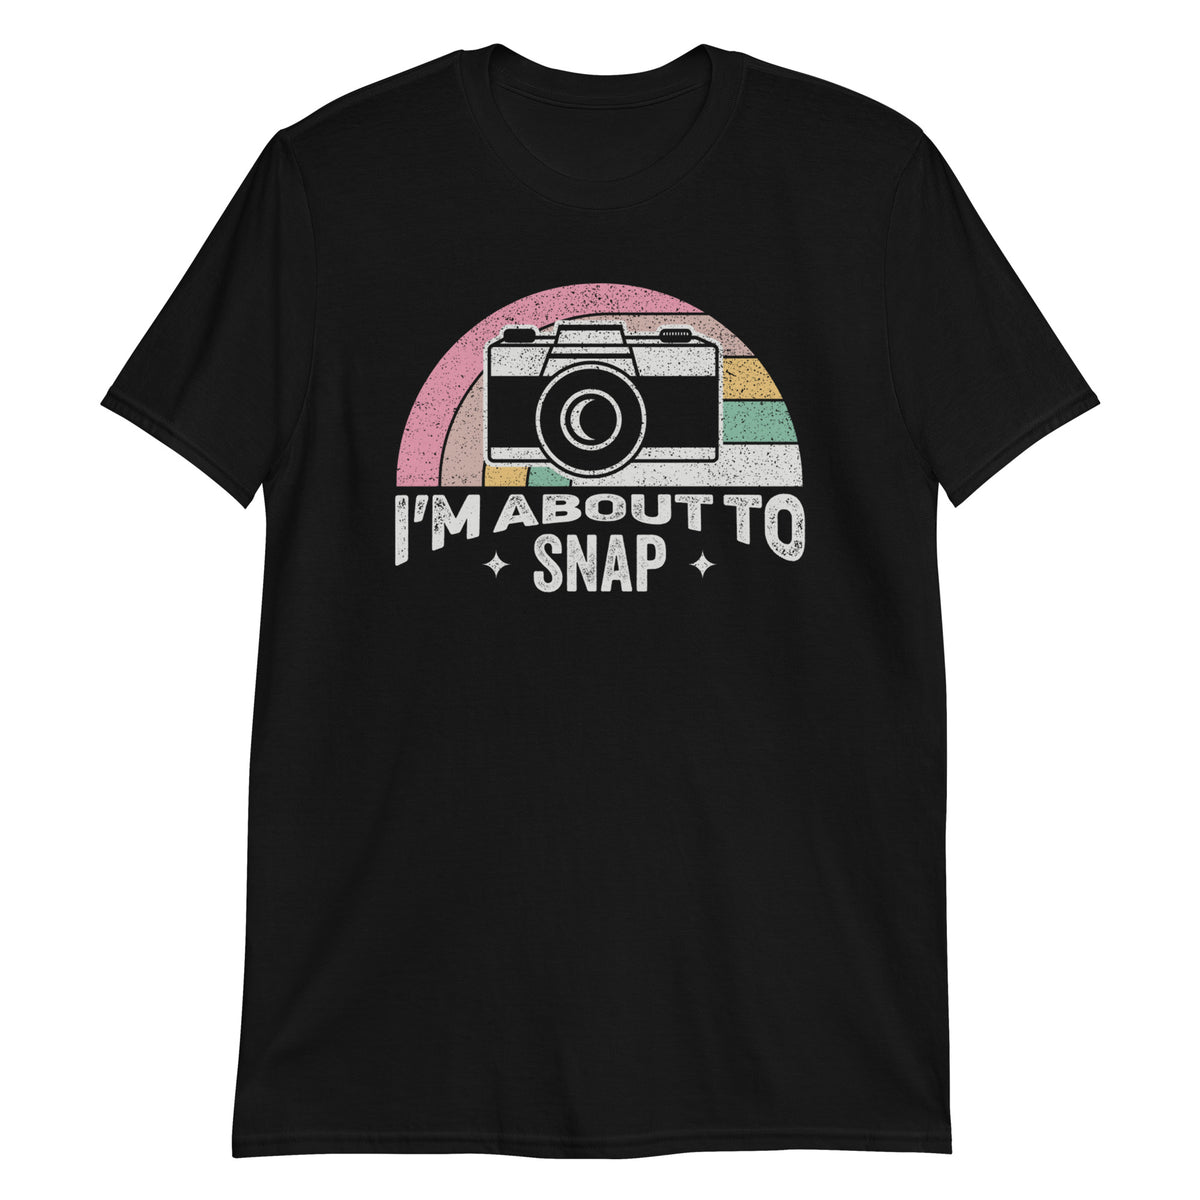 I'm About to Snap T-Shirt